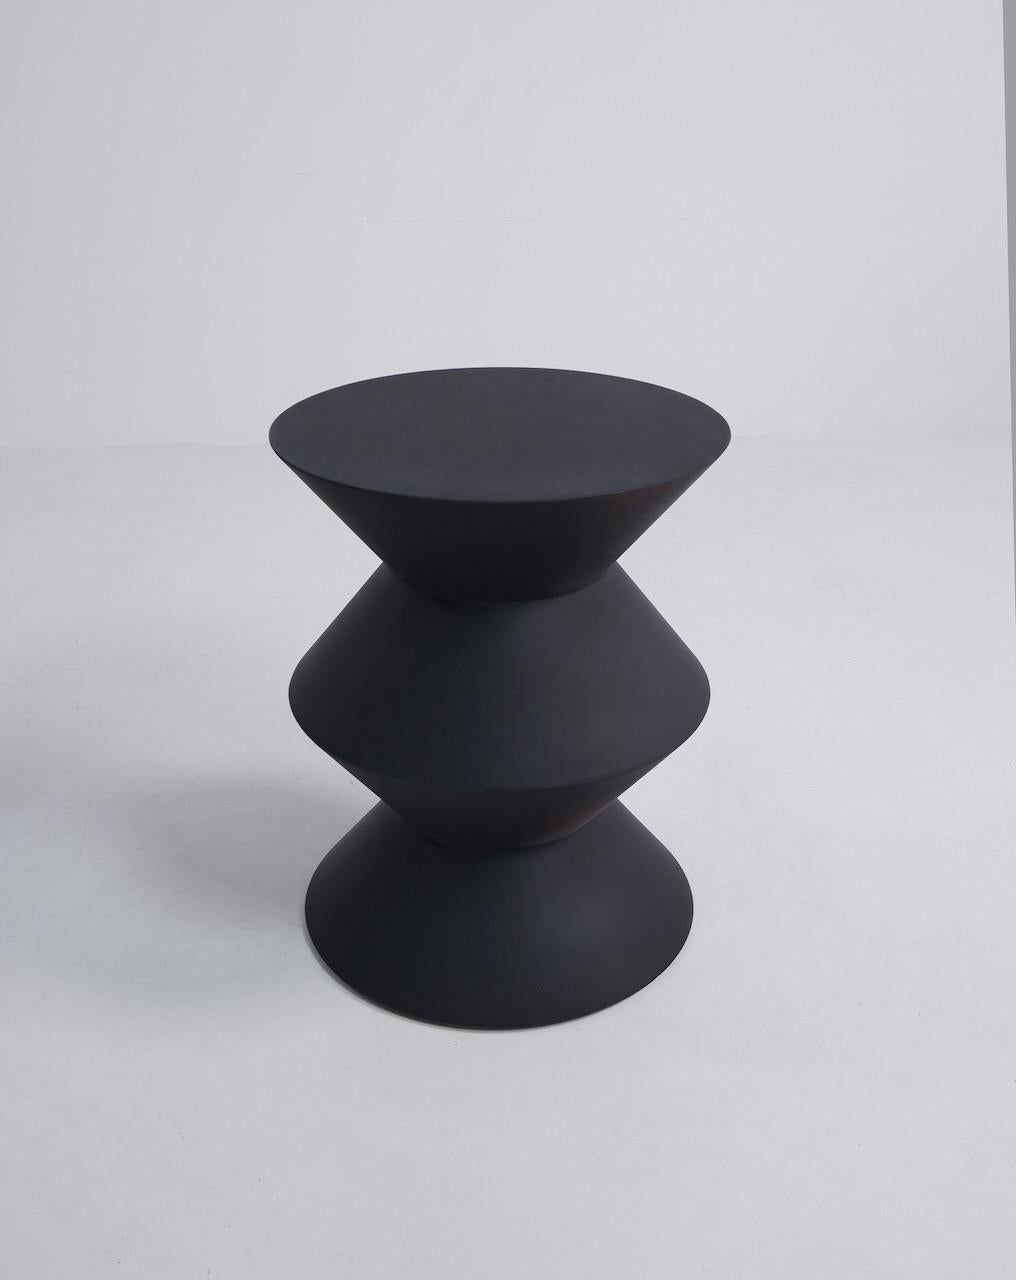 Sculptural stool / side table designed by Rodolfo Dordoni and produced by Minotti. Refinished in matt black.